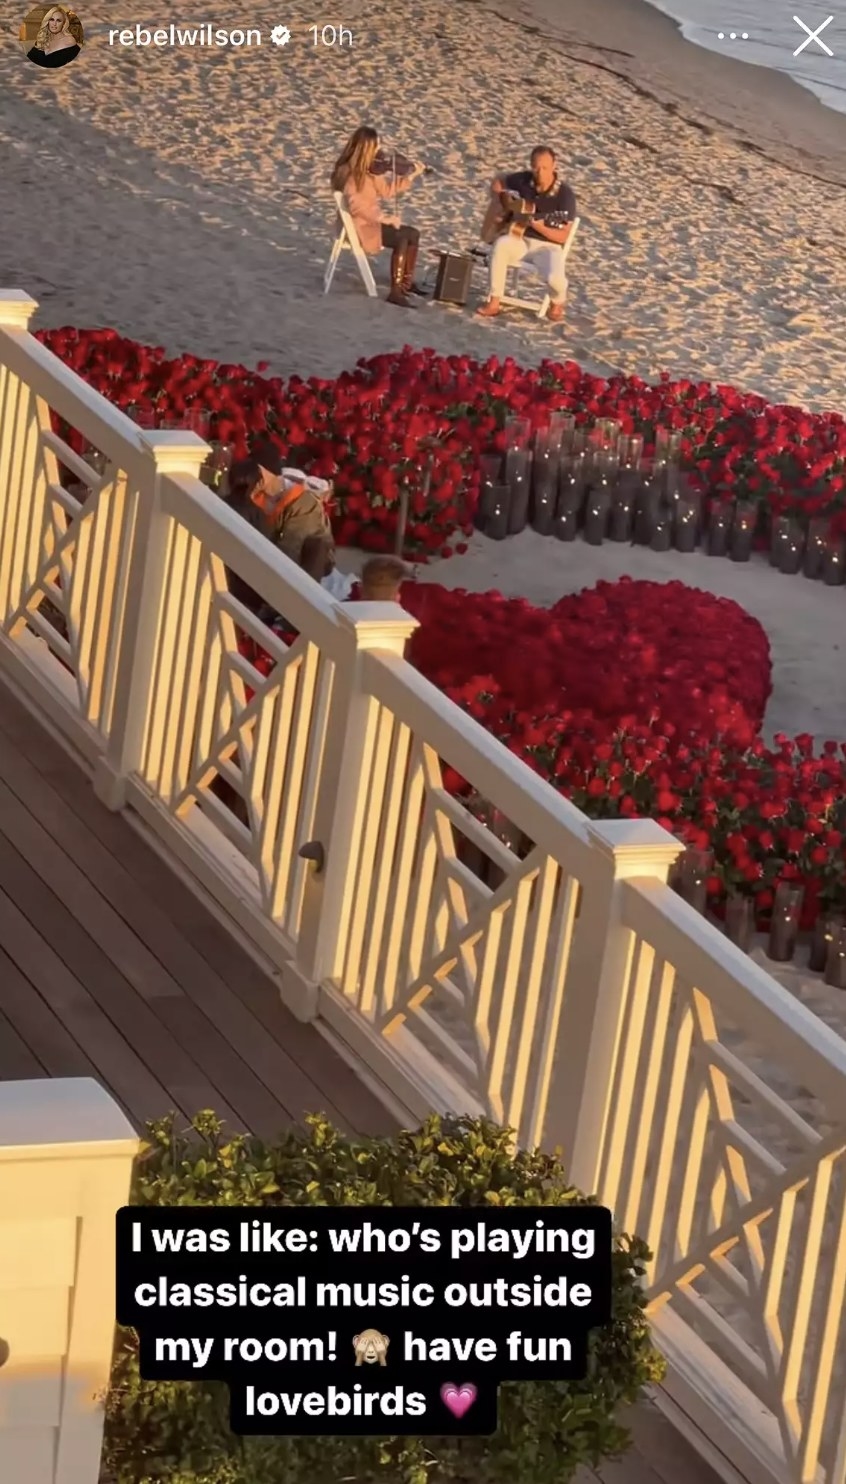 Kourt and Travis can be seen kissing while standing in the middle of a heart made of roses and candles on the beach